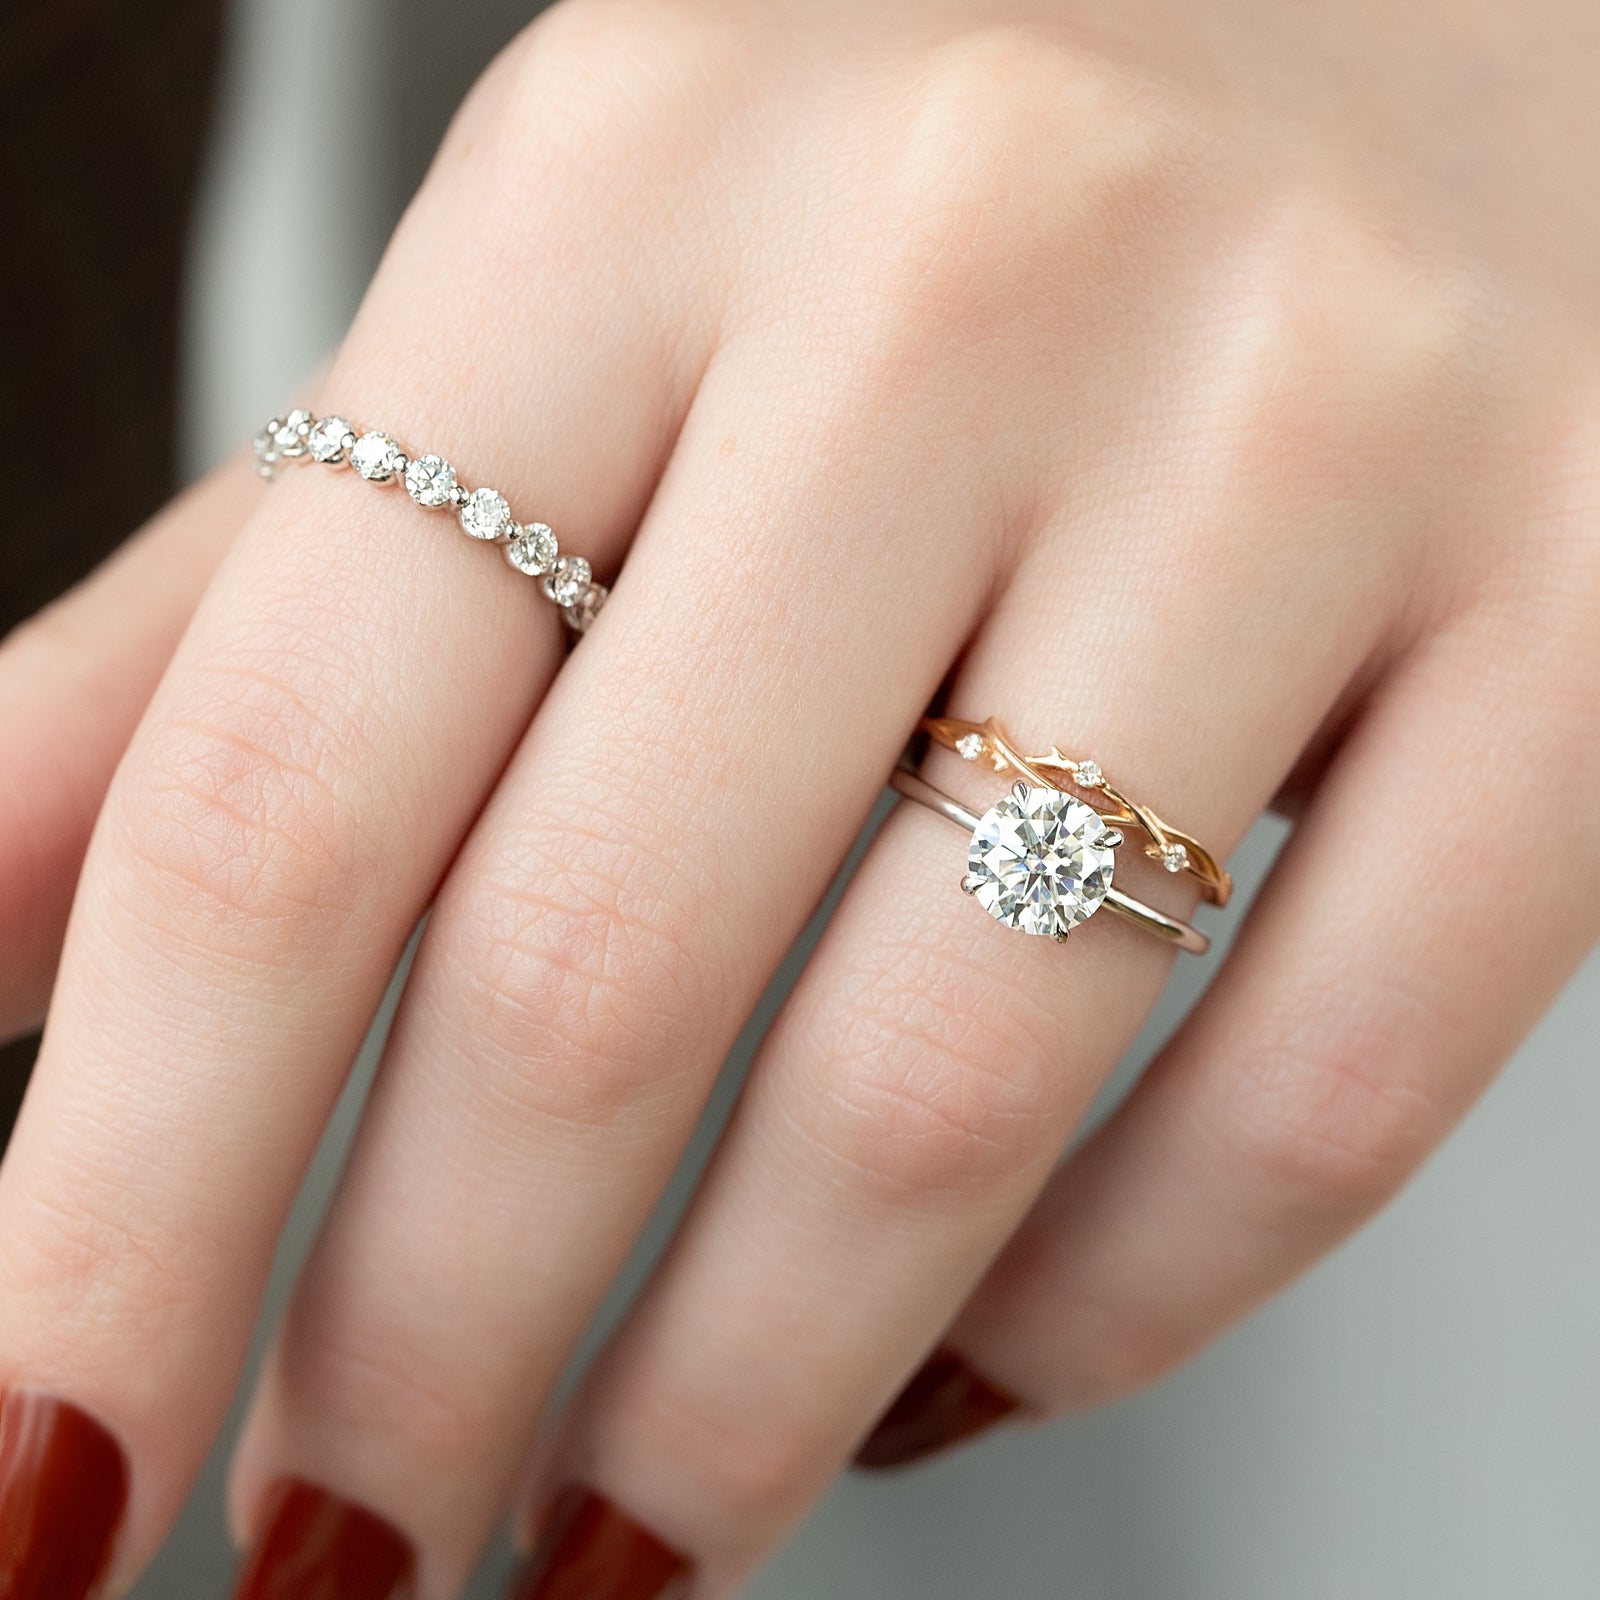 Keyzar · When size really matters: How an engagement ring should fit